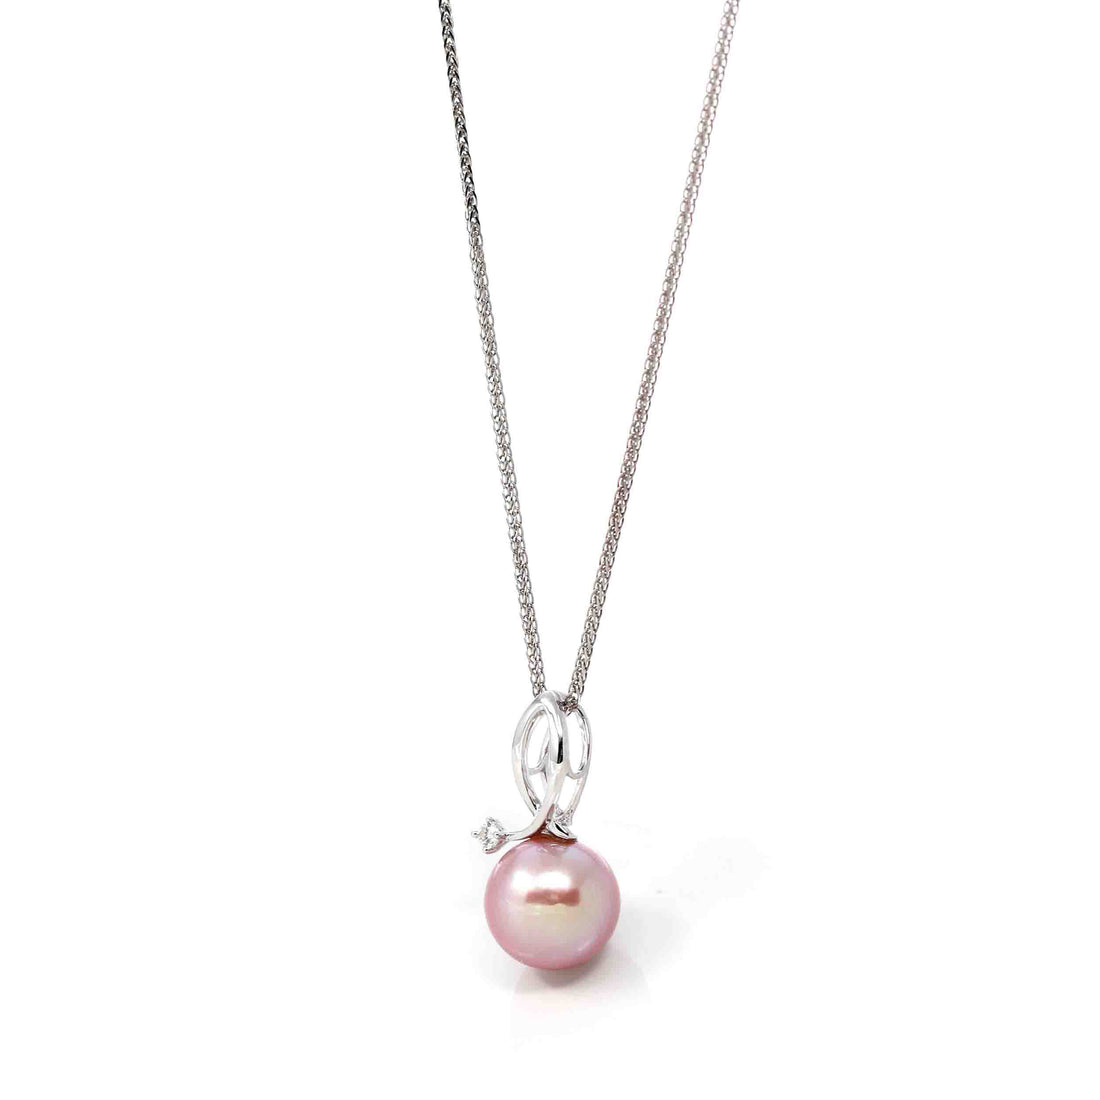 Baikalla Jewelry Gold Pearl Necklace 14k White Gold Culture Pink Pearl & Diamond Pendant Necklace